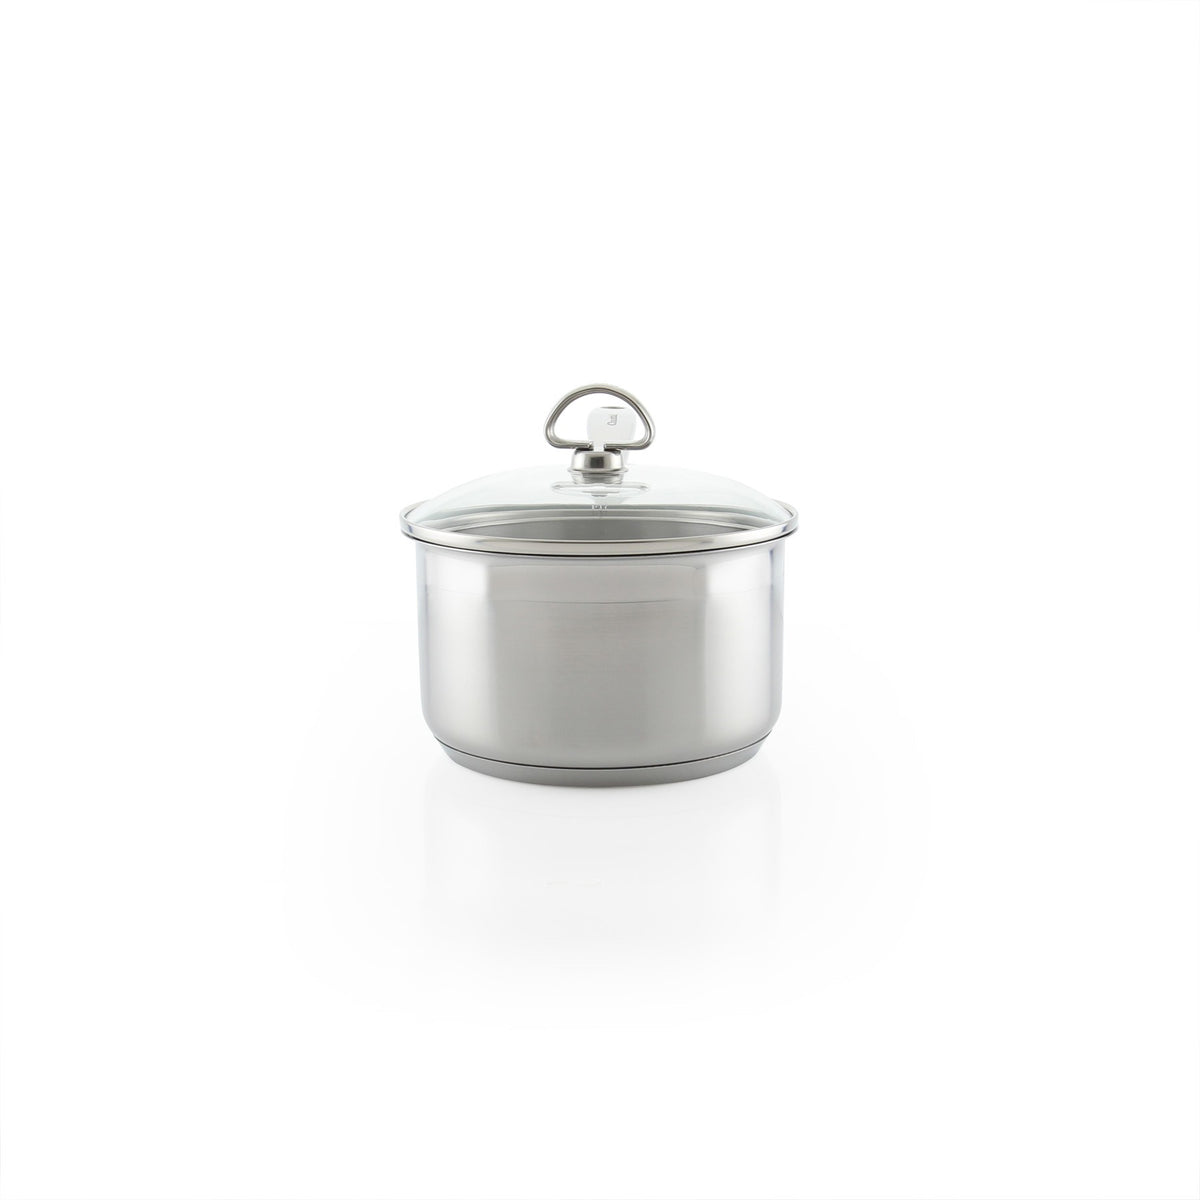 Browne (5724034) 4-1/2 qt Stainless Steel Sauce Pan